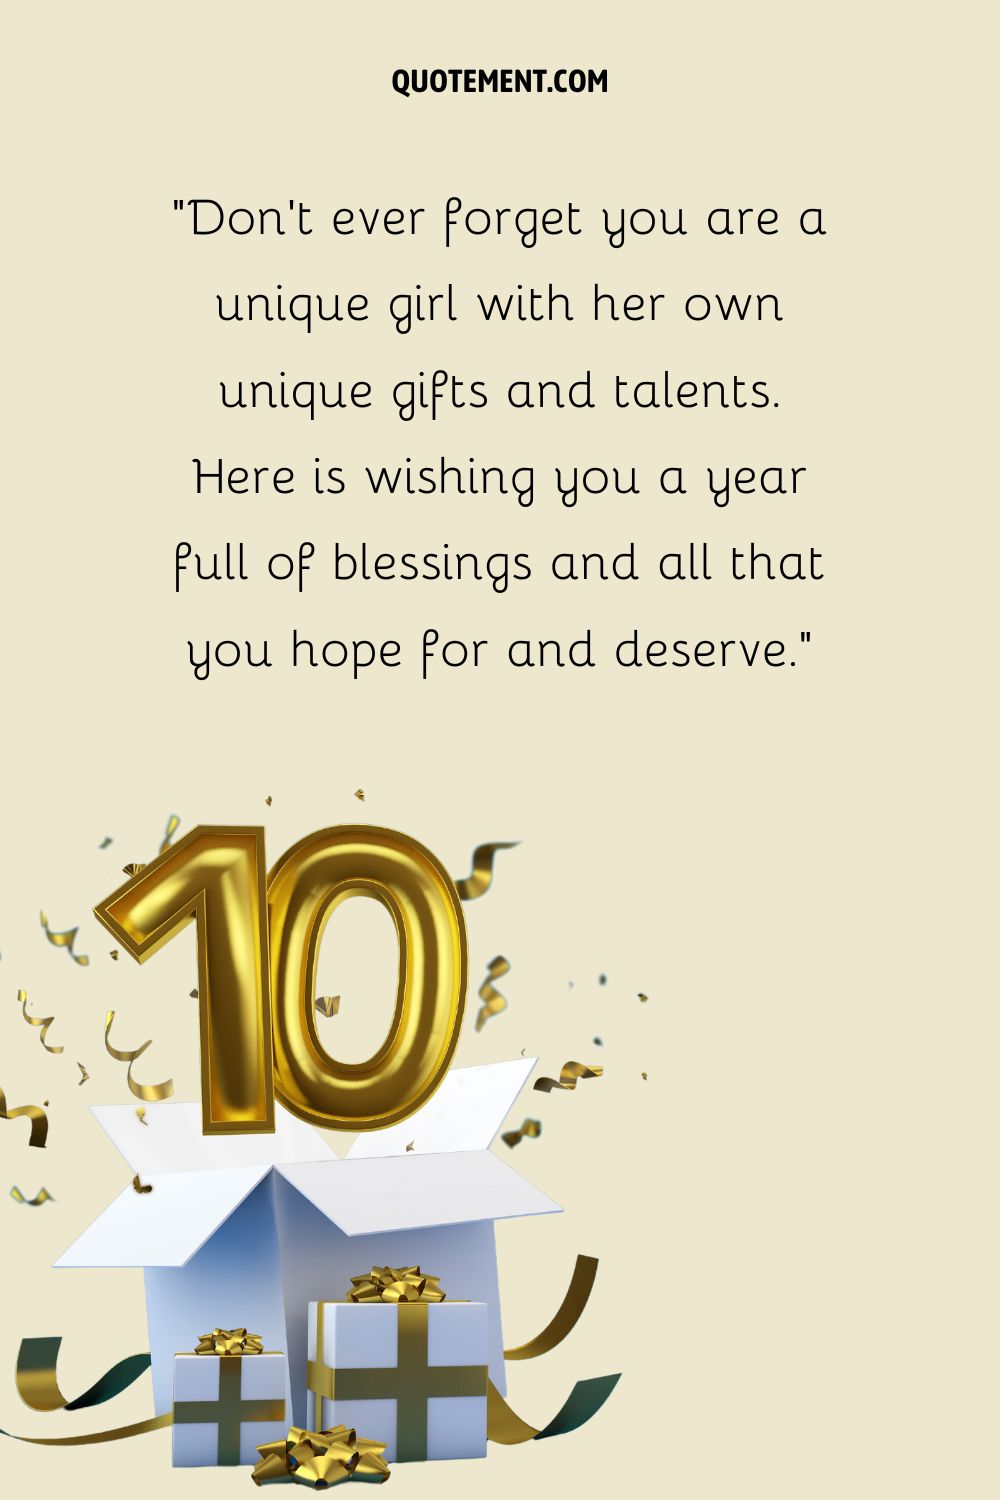 A golden number 10 placed above an open gift box with two more closed gift boxes next to it